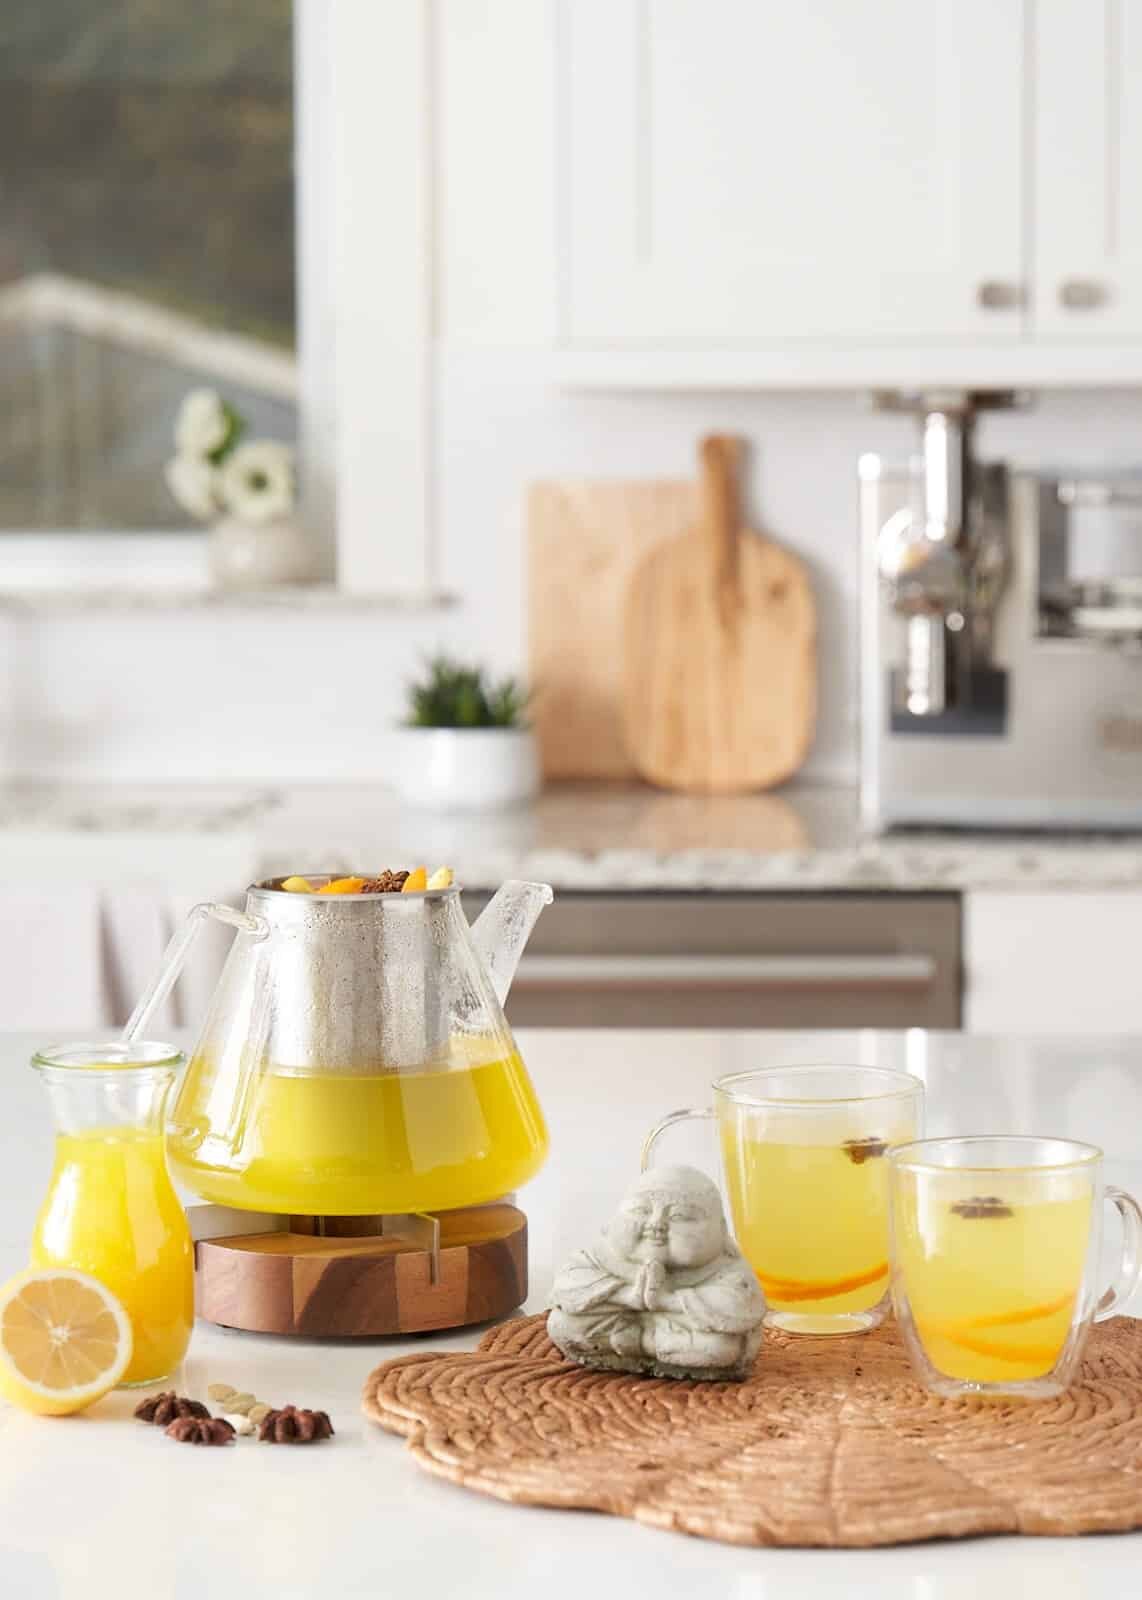 tea kettle and glass teacups filled with bright yellow tea made from juice pulp